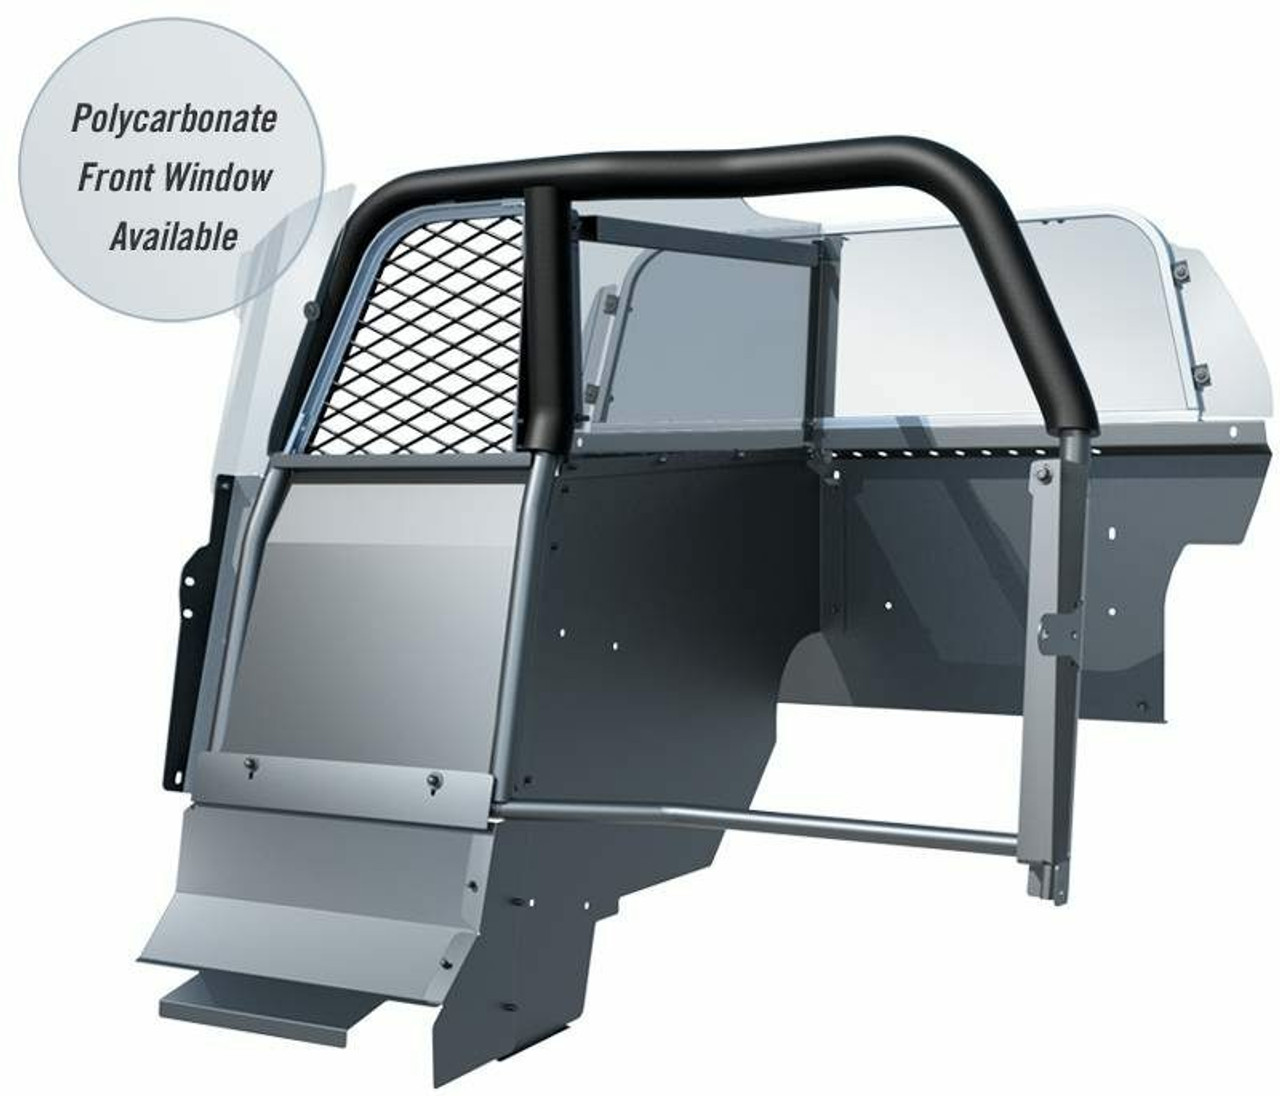 Setina Single Prisoner Transport Partitions Includes Lower Extension Panels For 2012-2019 Ford PIU